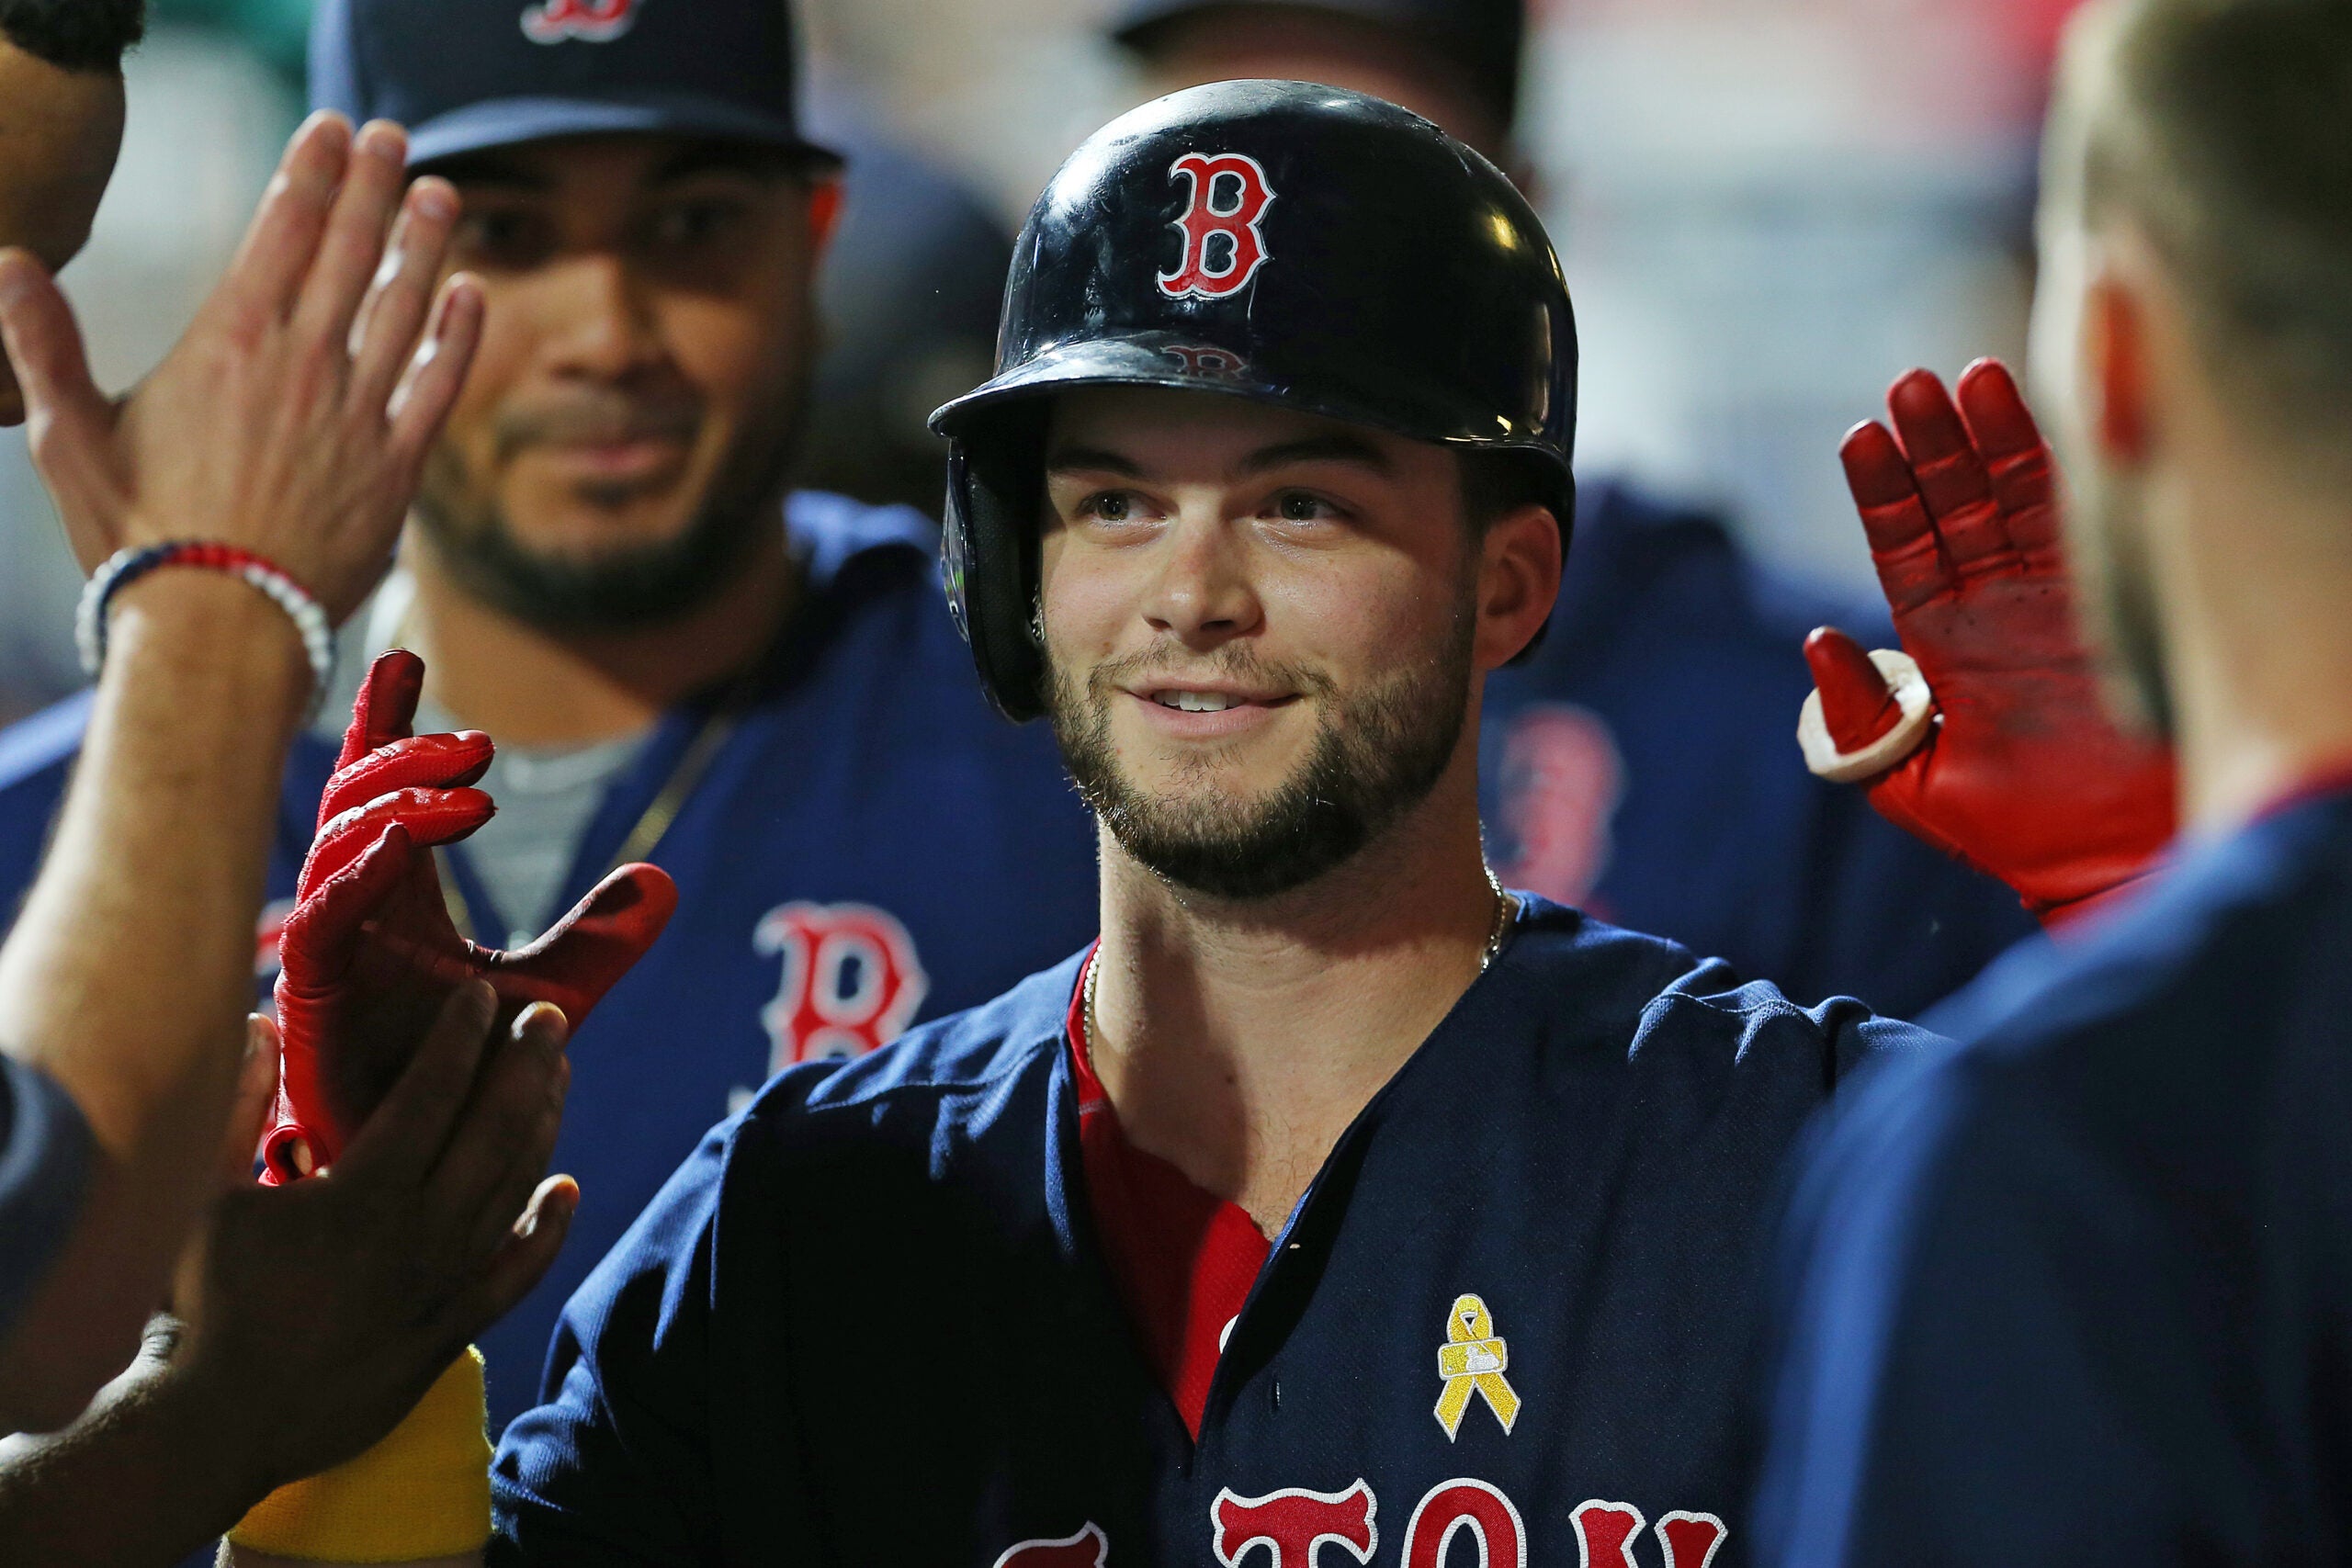 Red Sox trade Andrew Benintendi to Royals in three-team deal